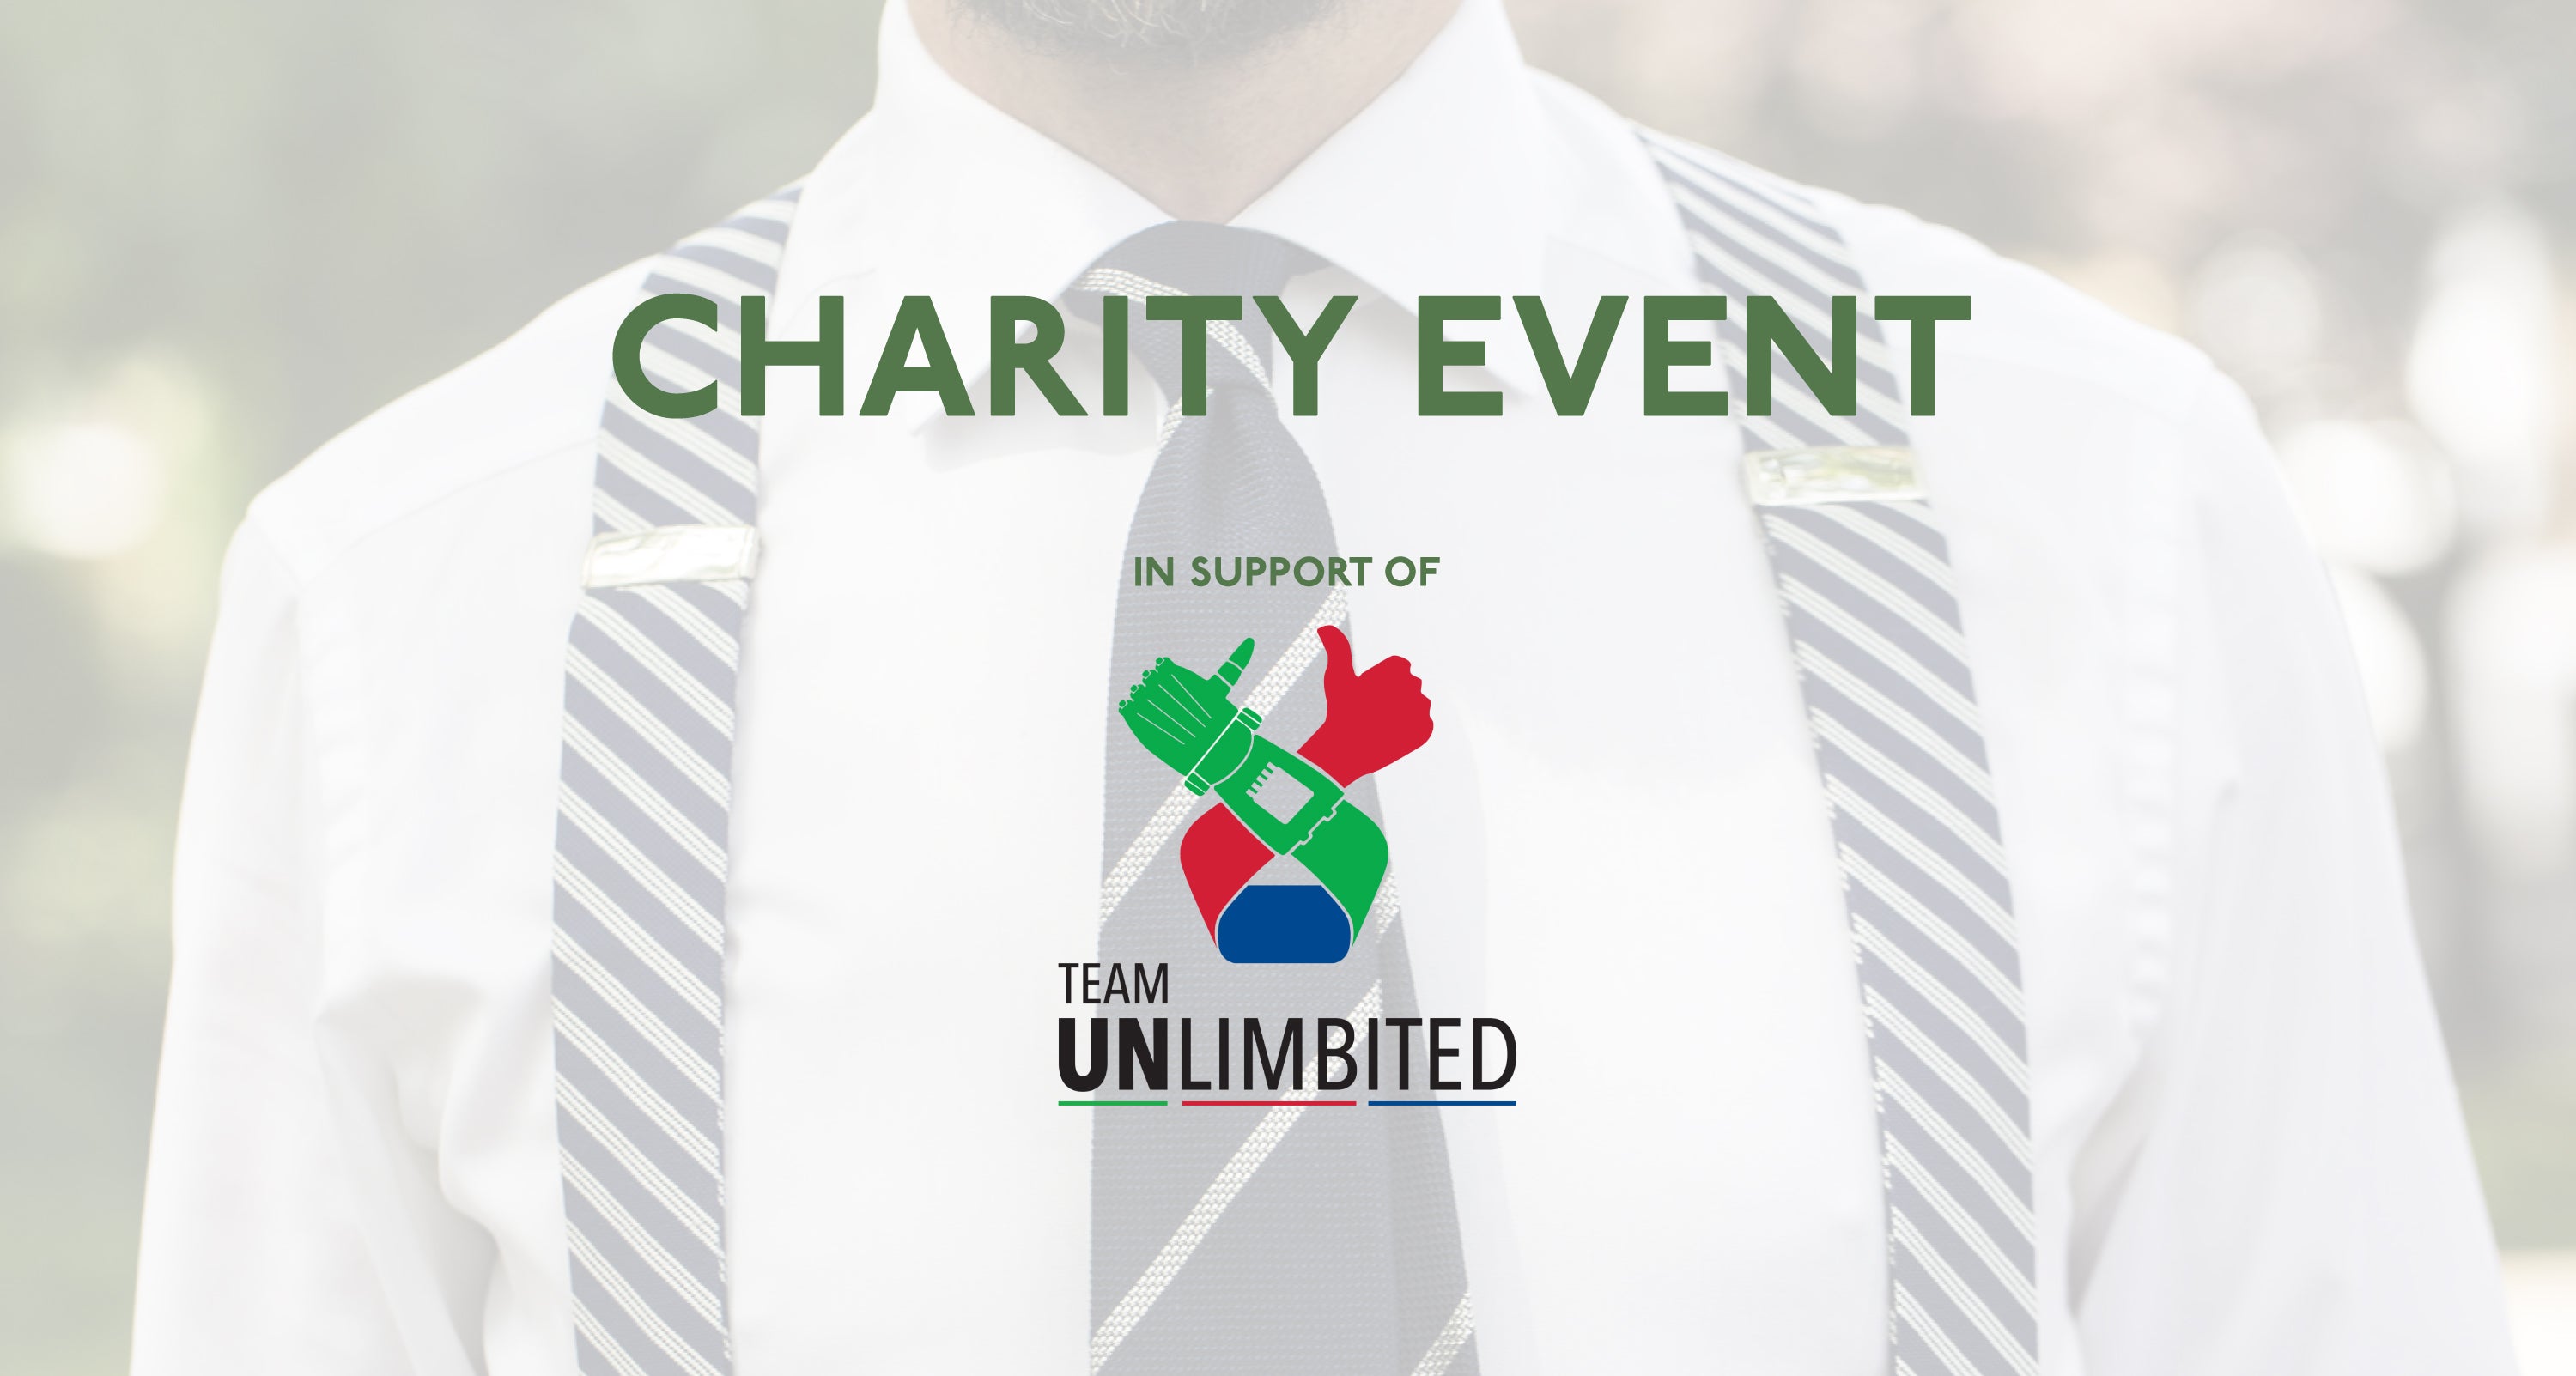 Charity Events in support of Team UnLimbited